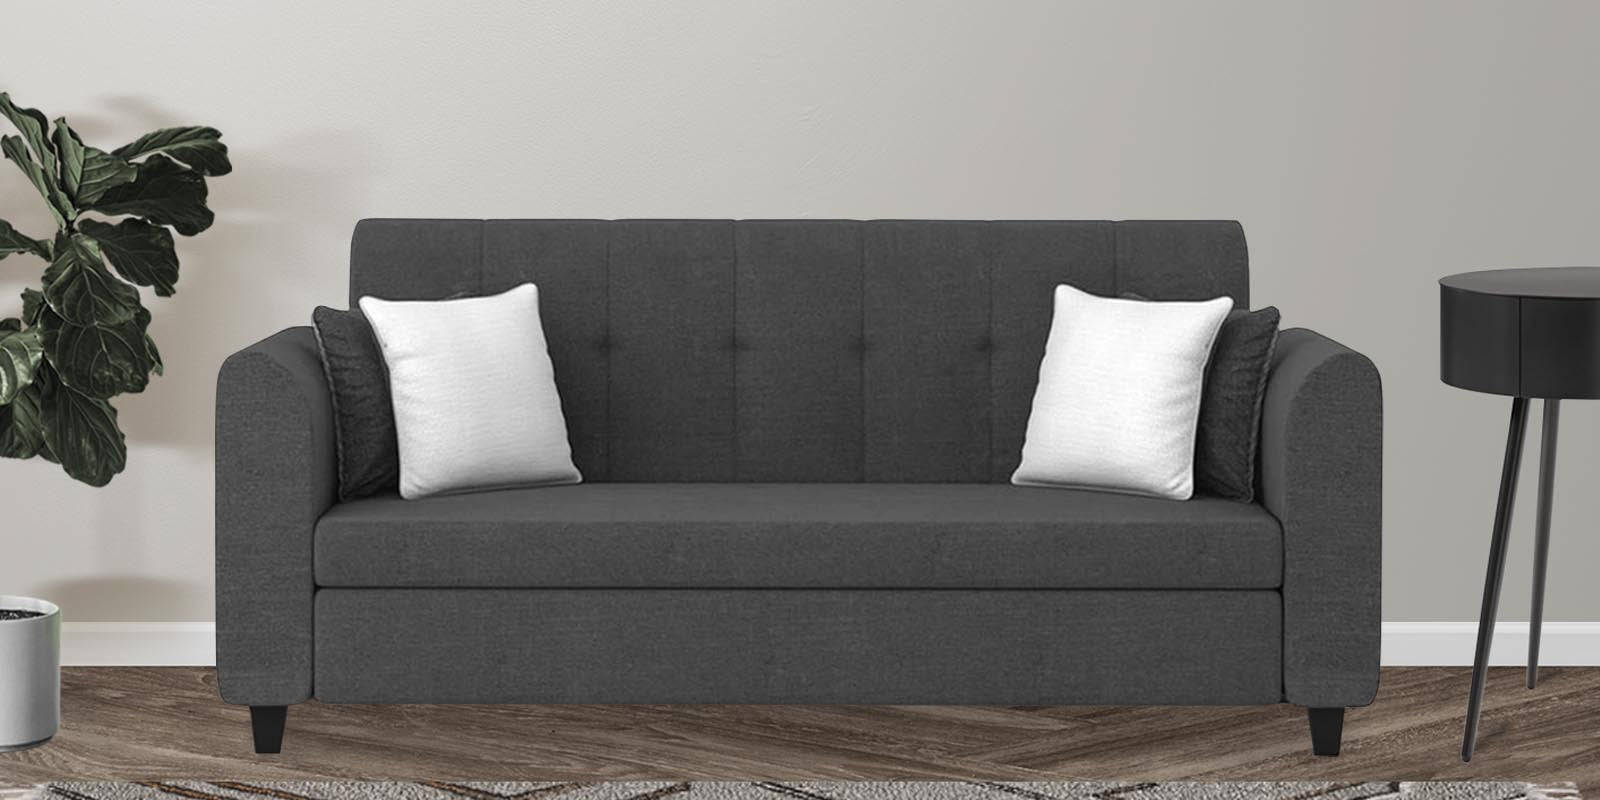 Denmark Fabric 3 Seater Sofa in Charcoal Grey Colour